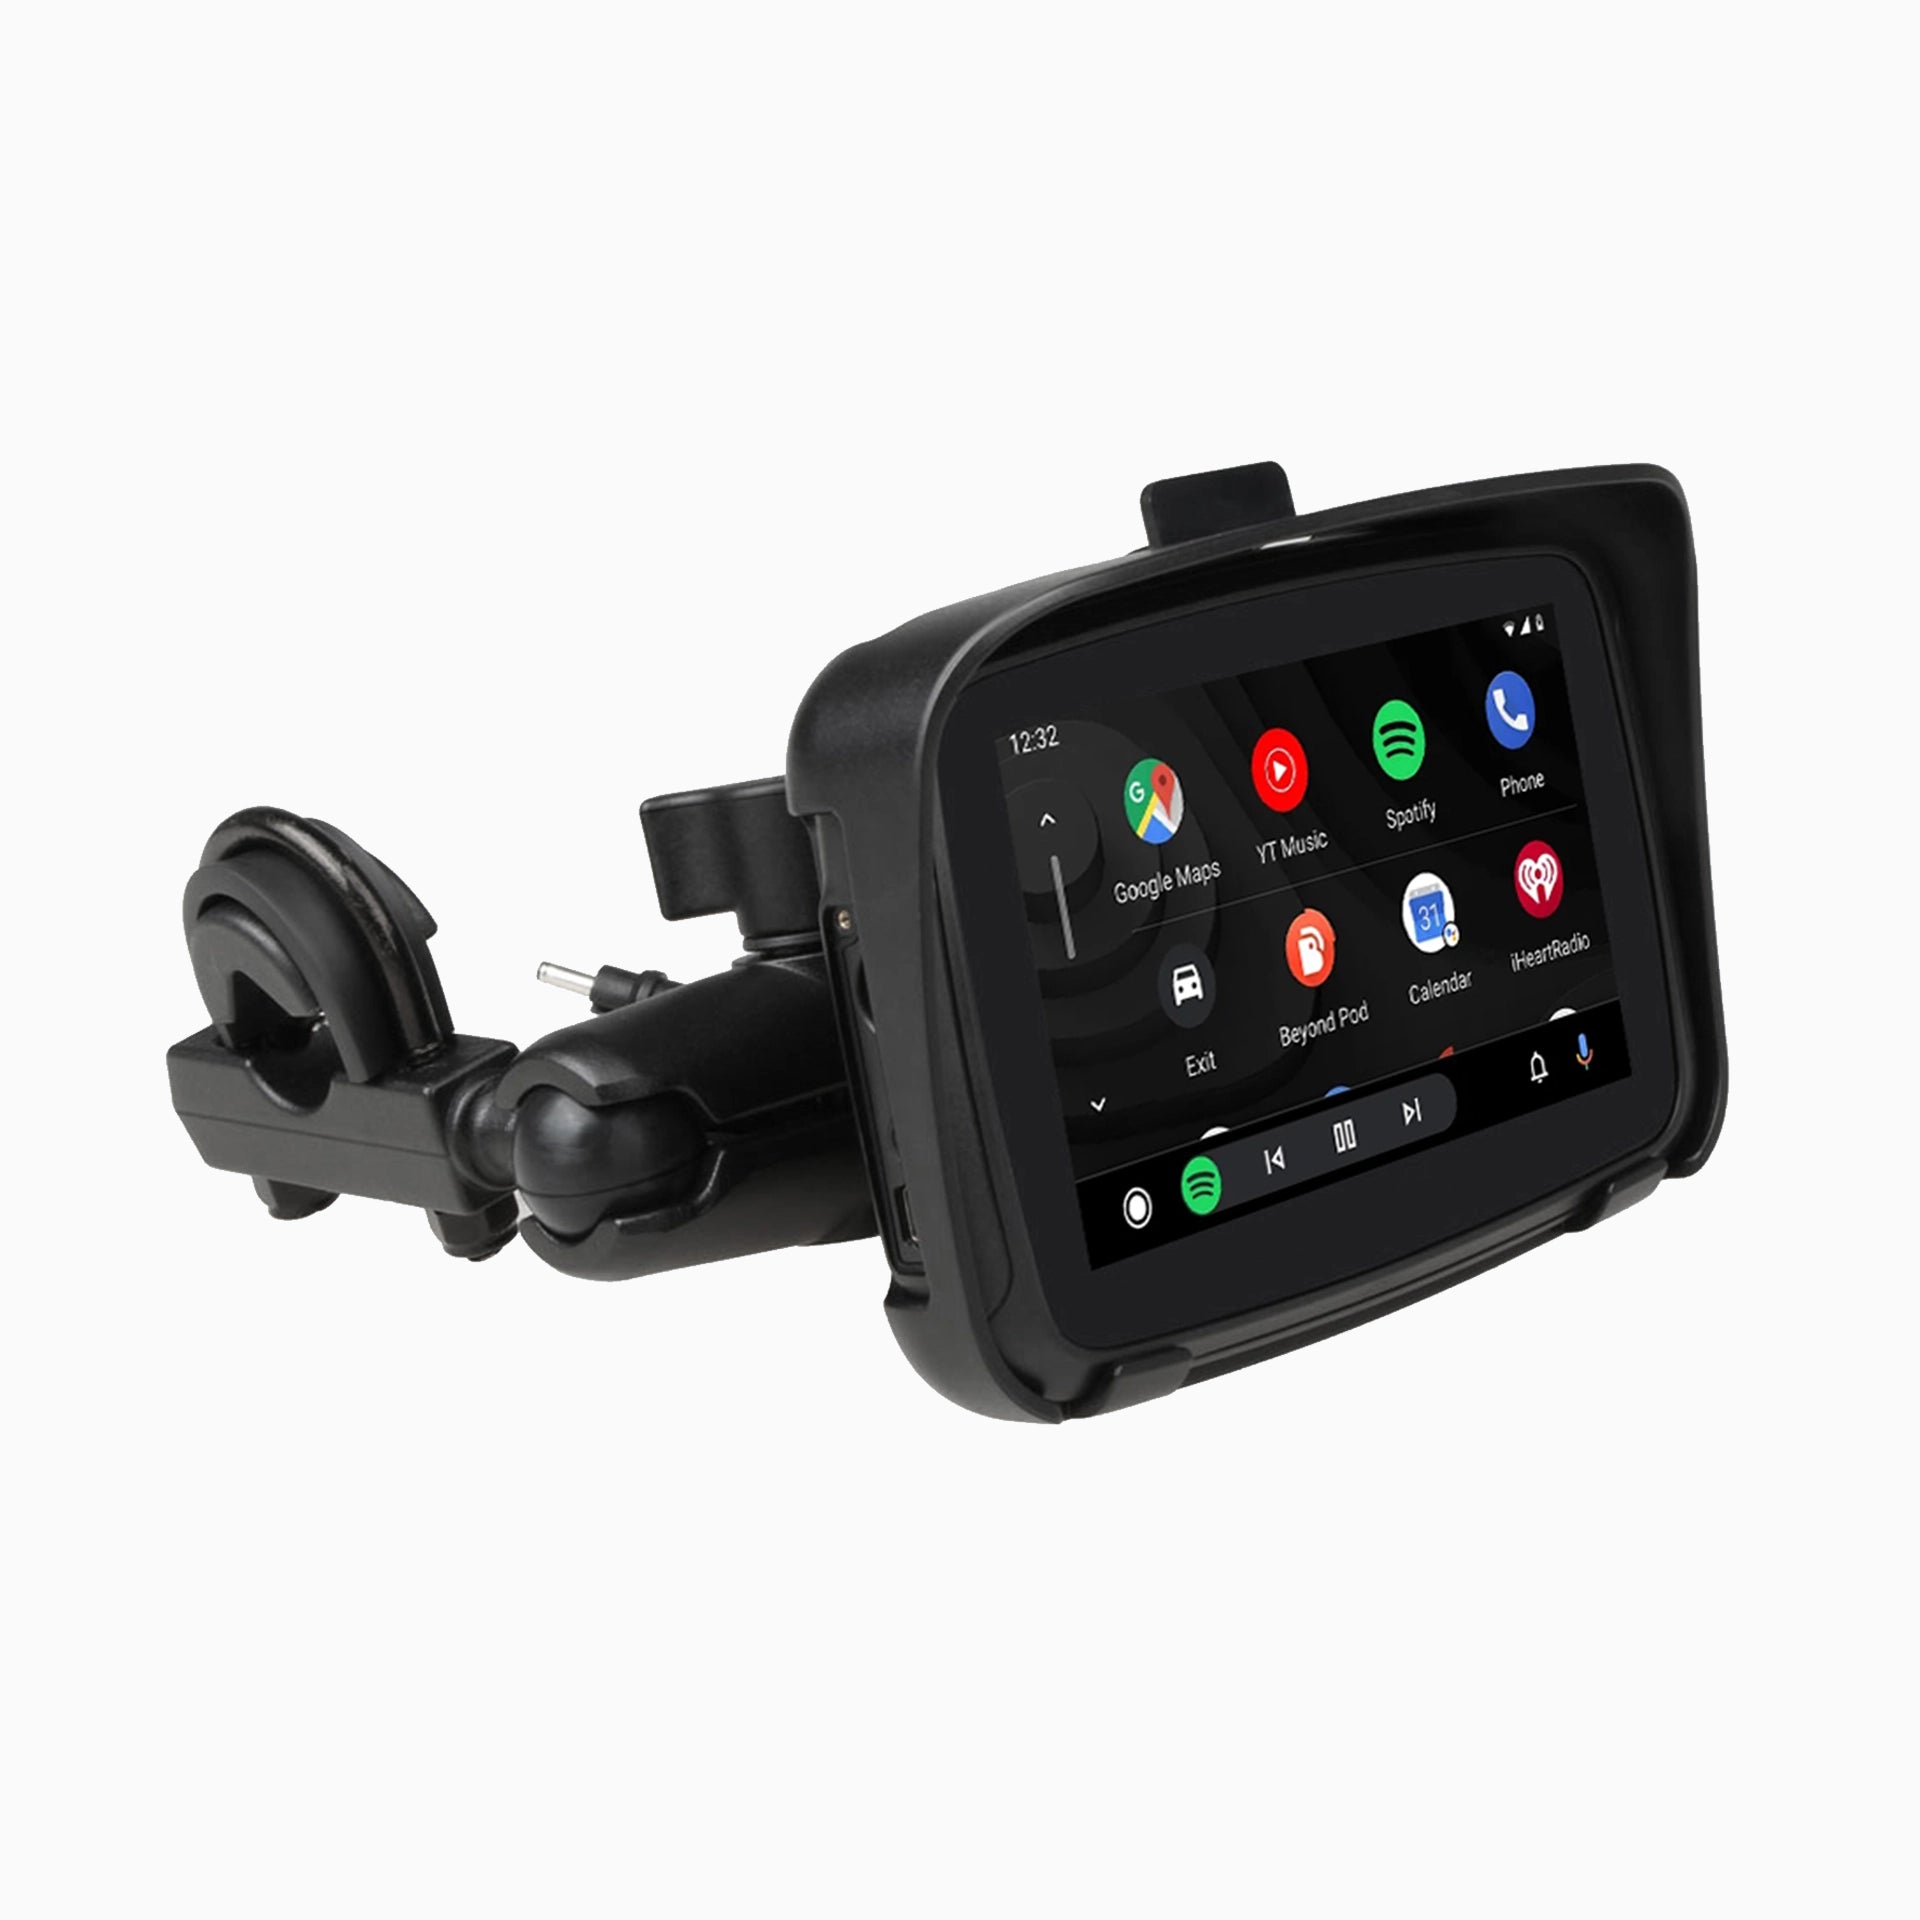 Smart bike screen display with 1920x1920 resolution, featuring colorful app icons in a sleek black casing. Provides convenient access to features and info while riding